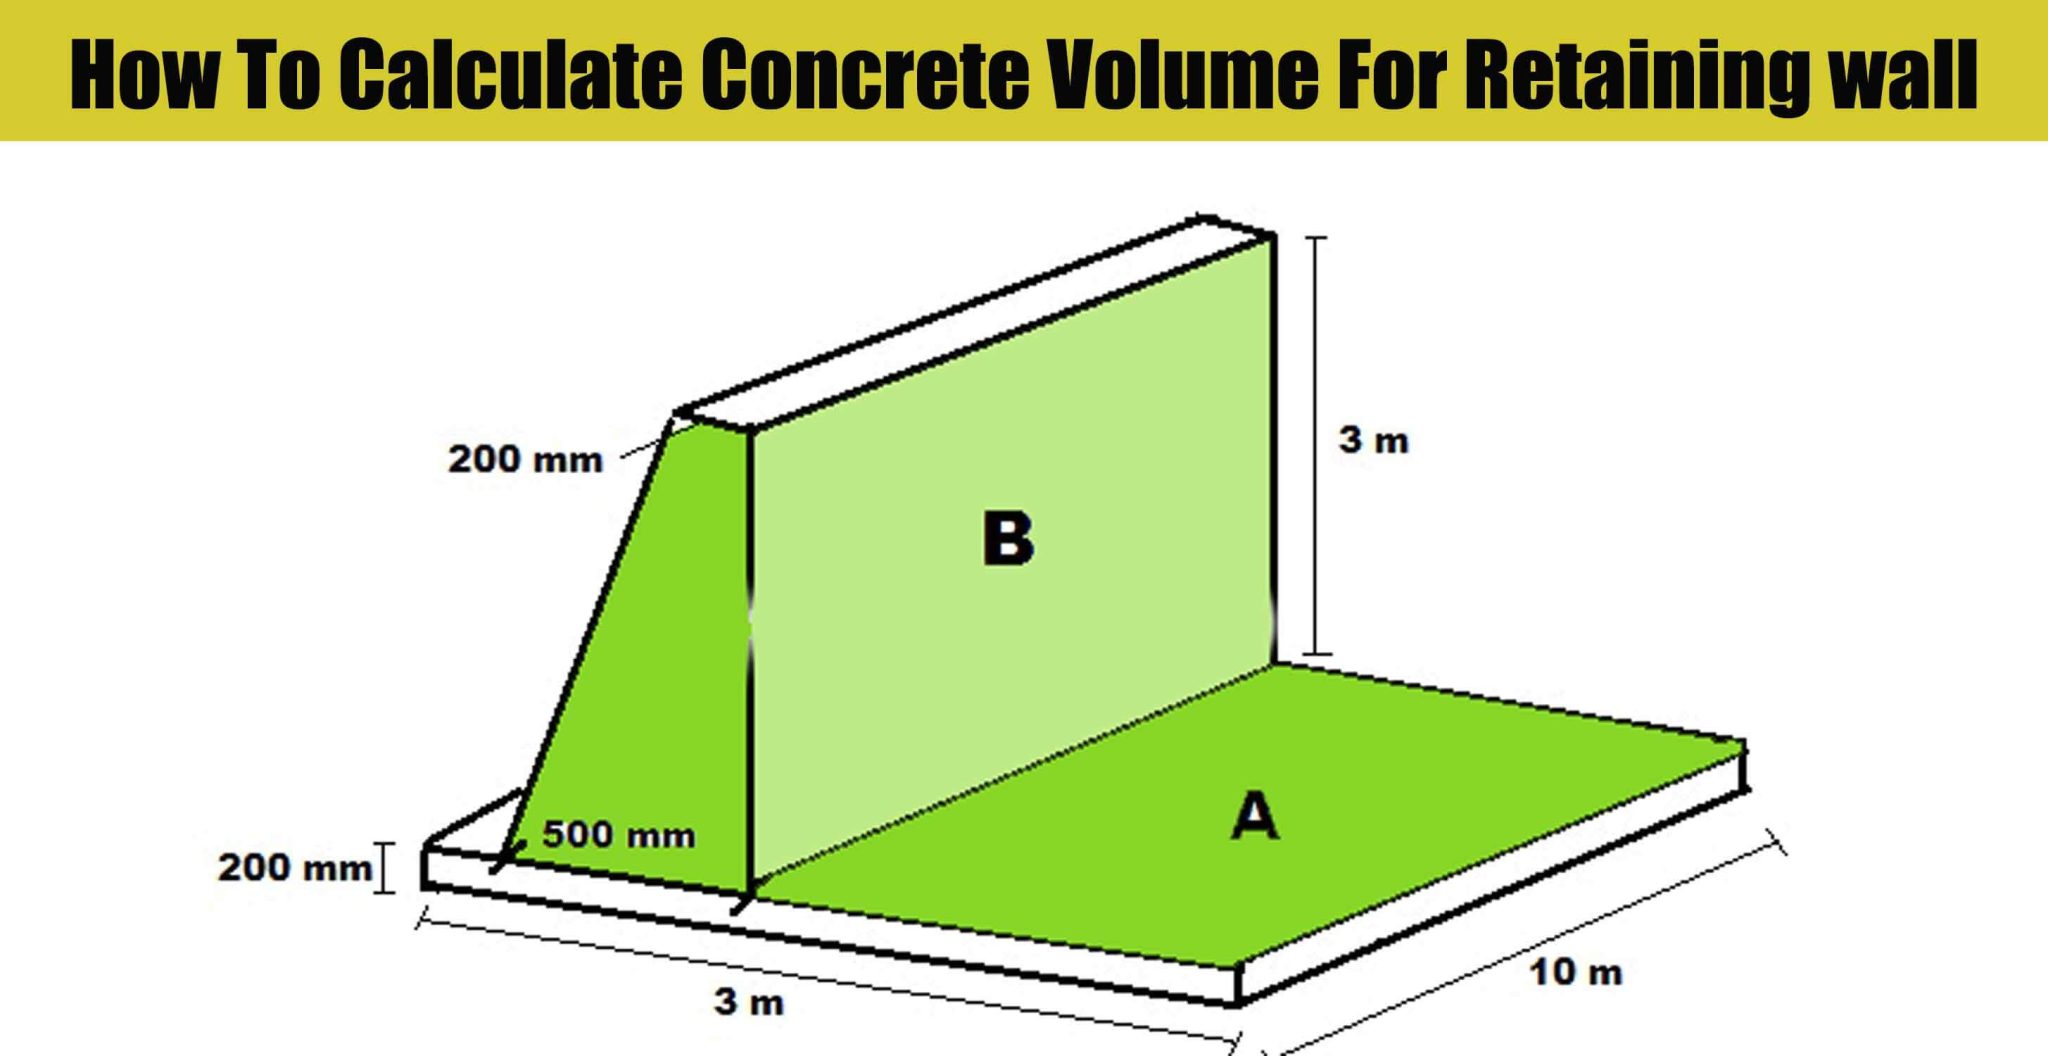 How To Calculate Concrete Volume For Retaining wall - Engineering